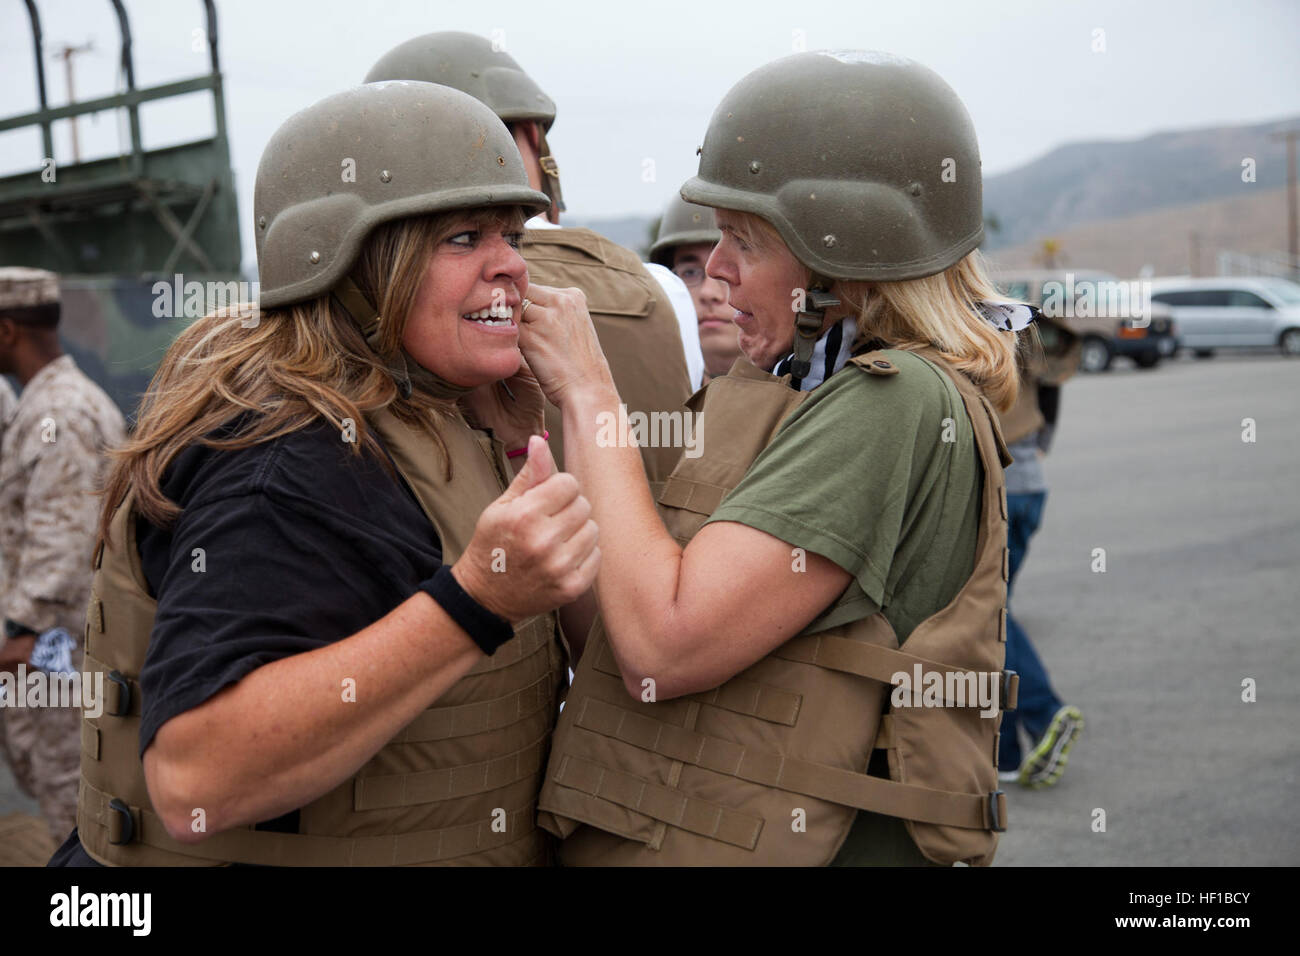 Monica Russell, right, wife of U.S. Marine Corps Col. Joseph Russell, commanding officer of Headquarters Battalion (HQBN), 1st Marine Division (1st MARDIV), secures a kevlar helmet on Janet Fliegel, left, wife of Sgt. Maj. Daniel Fliegel, Battalion Sgt. Maj., during HQBN's Jane Wayne day aboard Camp Pendleton, Calif., June 22, 2013. Jane Wayne Day is an opportunity for family and friends of service members to participate in Marine Corps training, while strengthening family readiness through team building. (U.S. Marine Corps photo by Pfc. Adrianna Stalker, 1st Marine Division/Released) GI Joe a Stock Photo